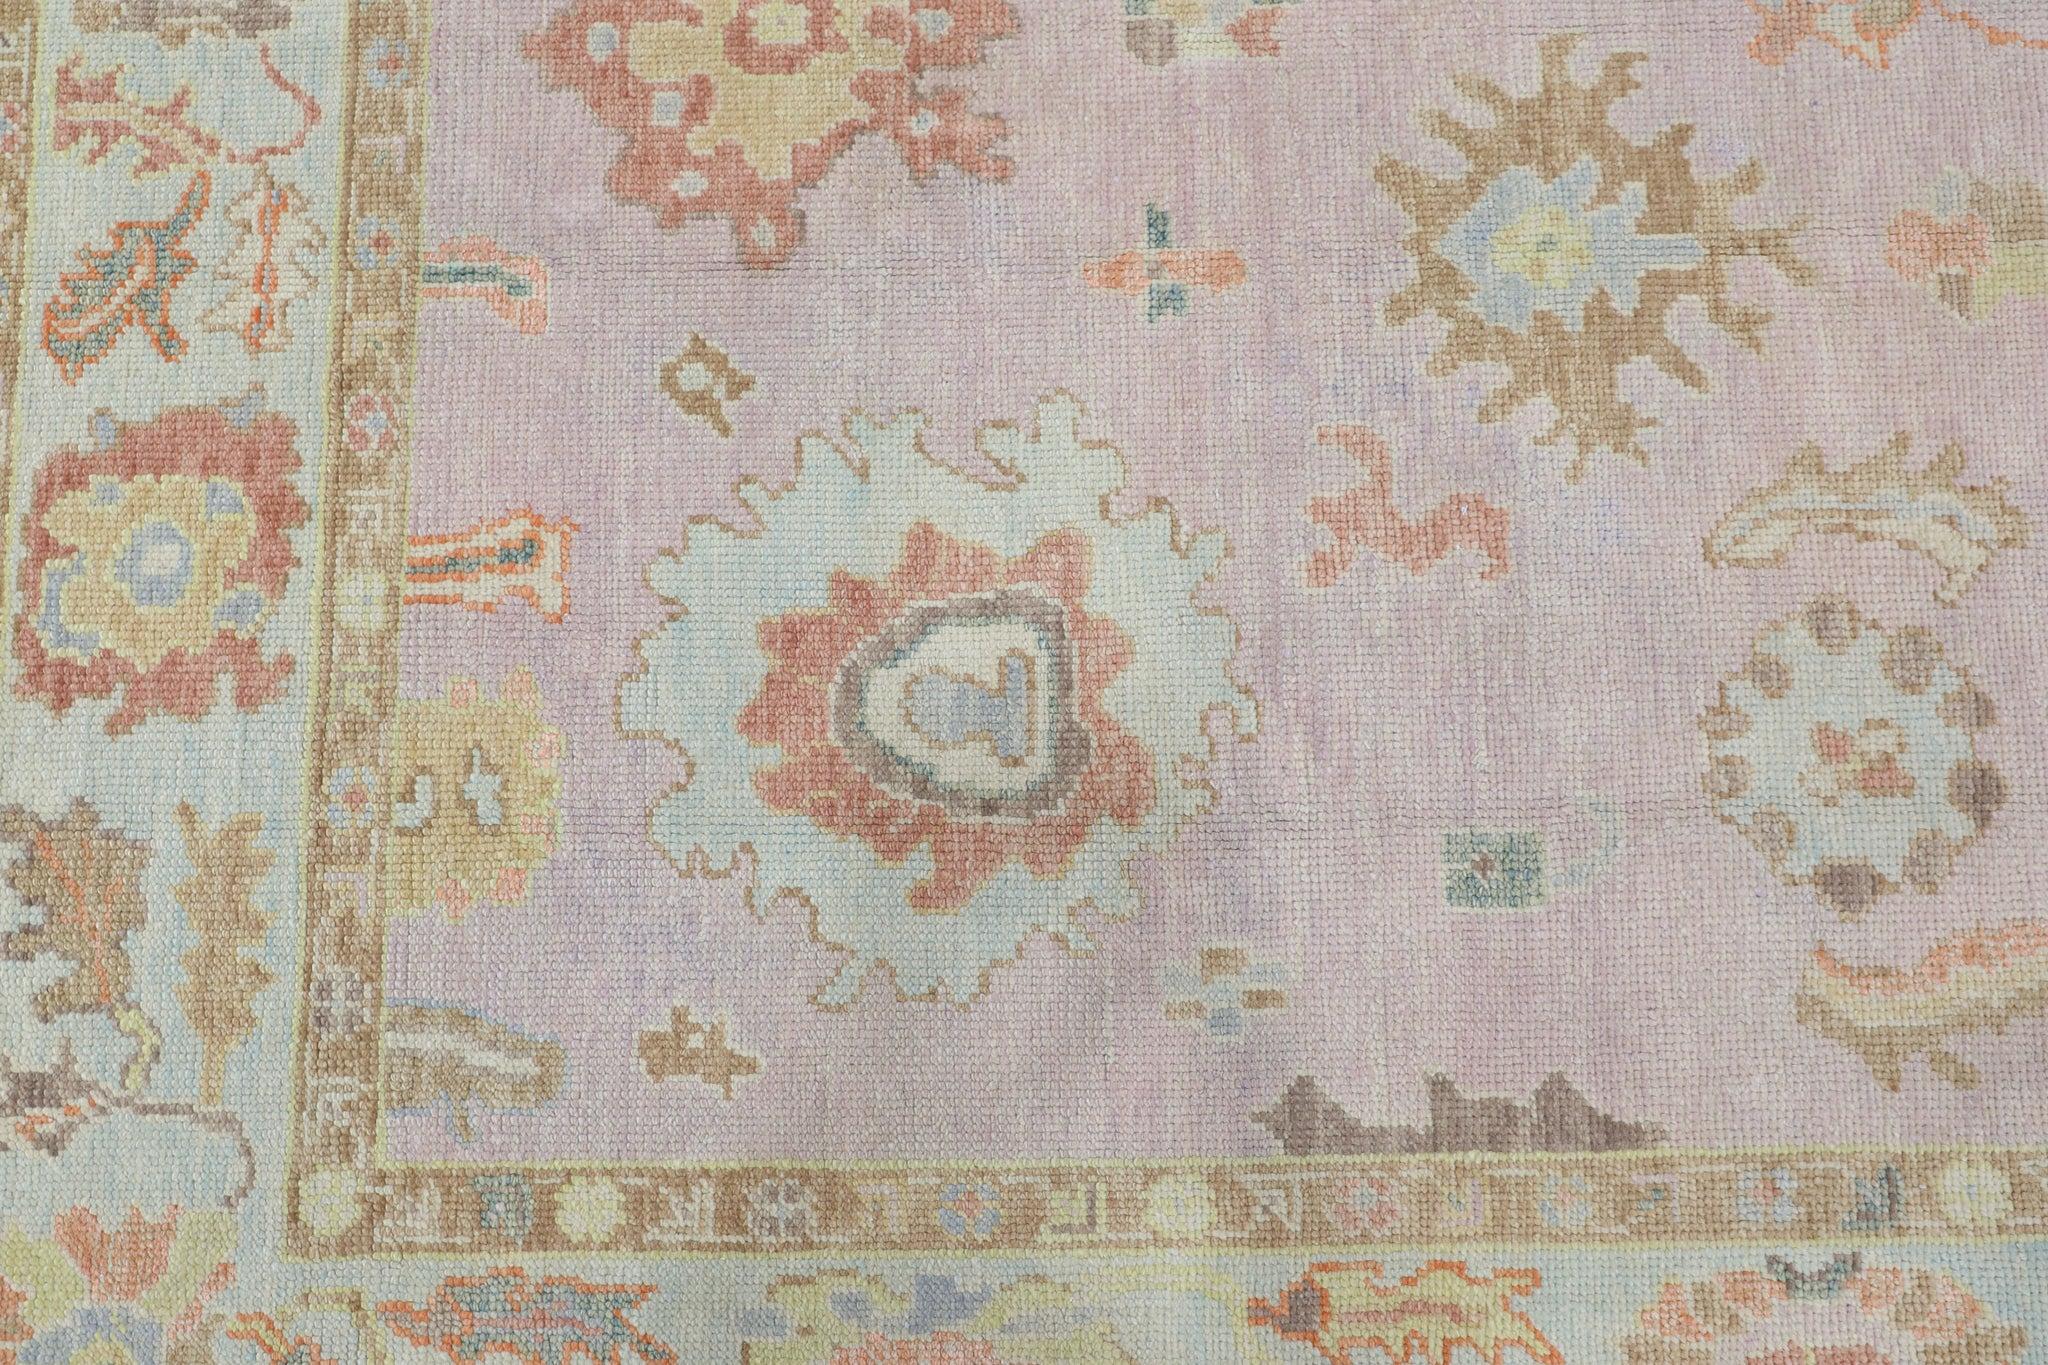 Vegetable Dyed Pink and Blue Floral Design Handwoven Wool Turkish Oushak Rug 6'2